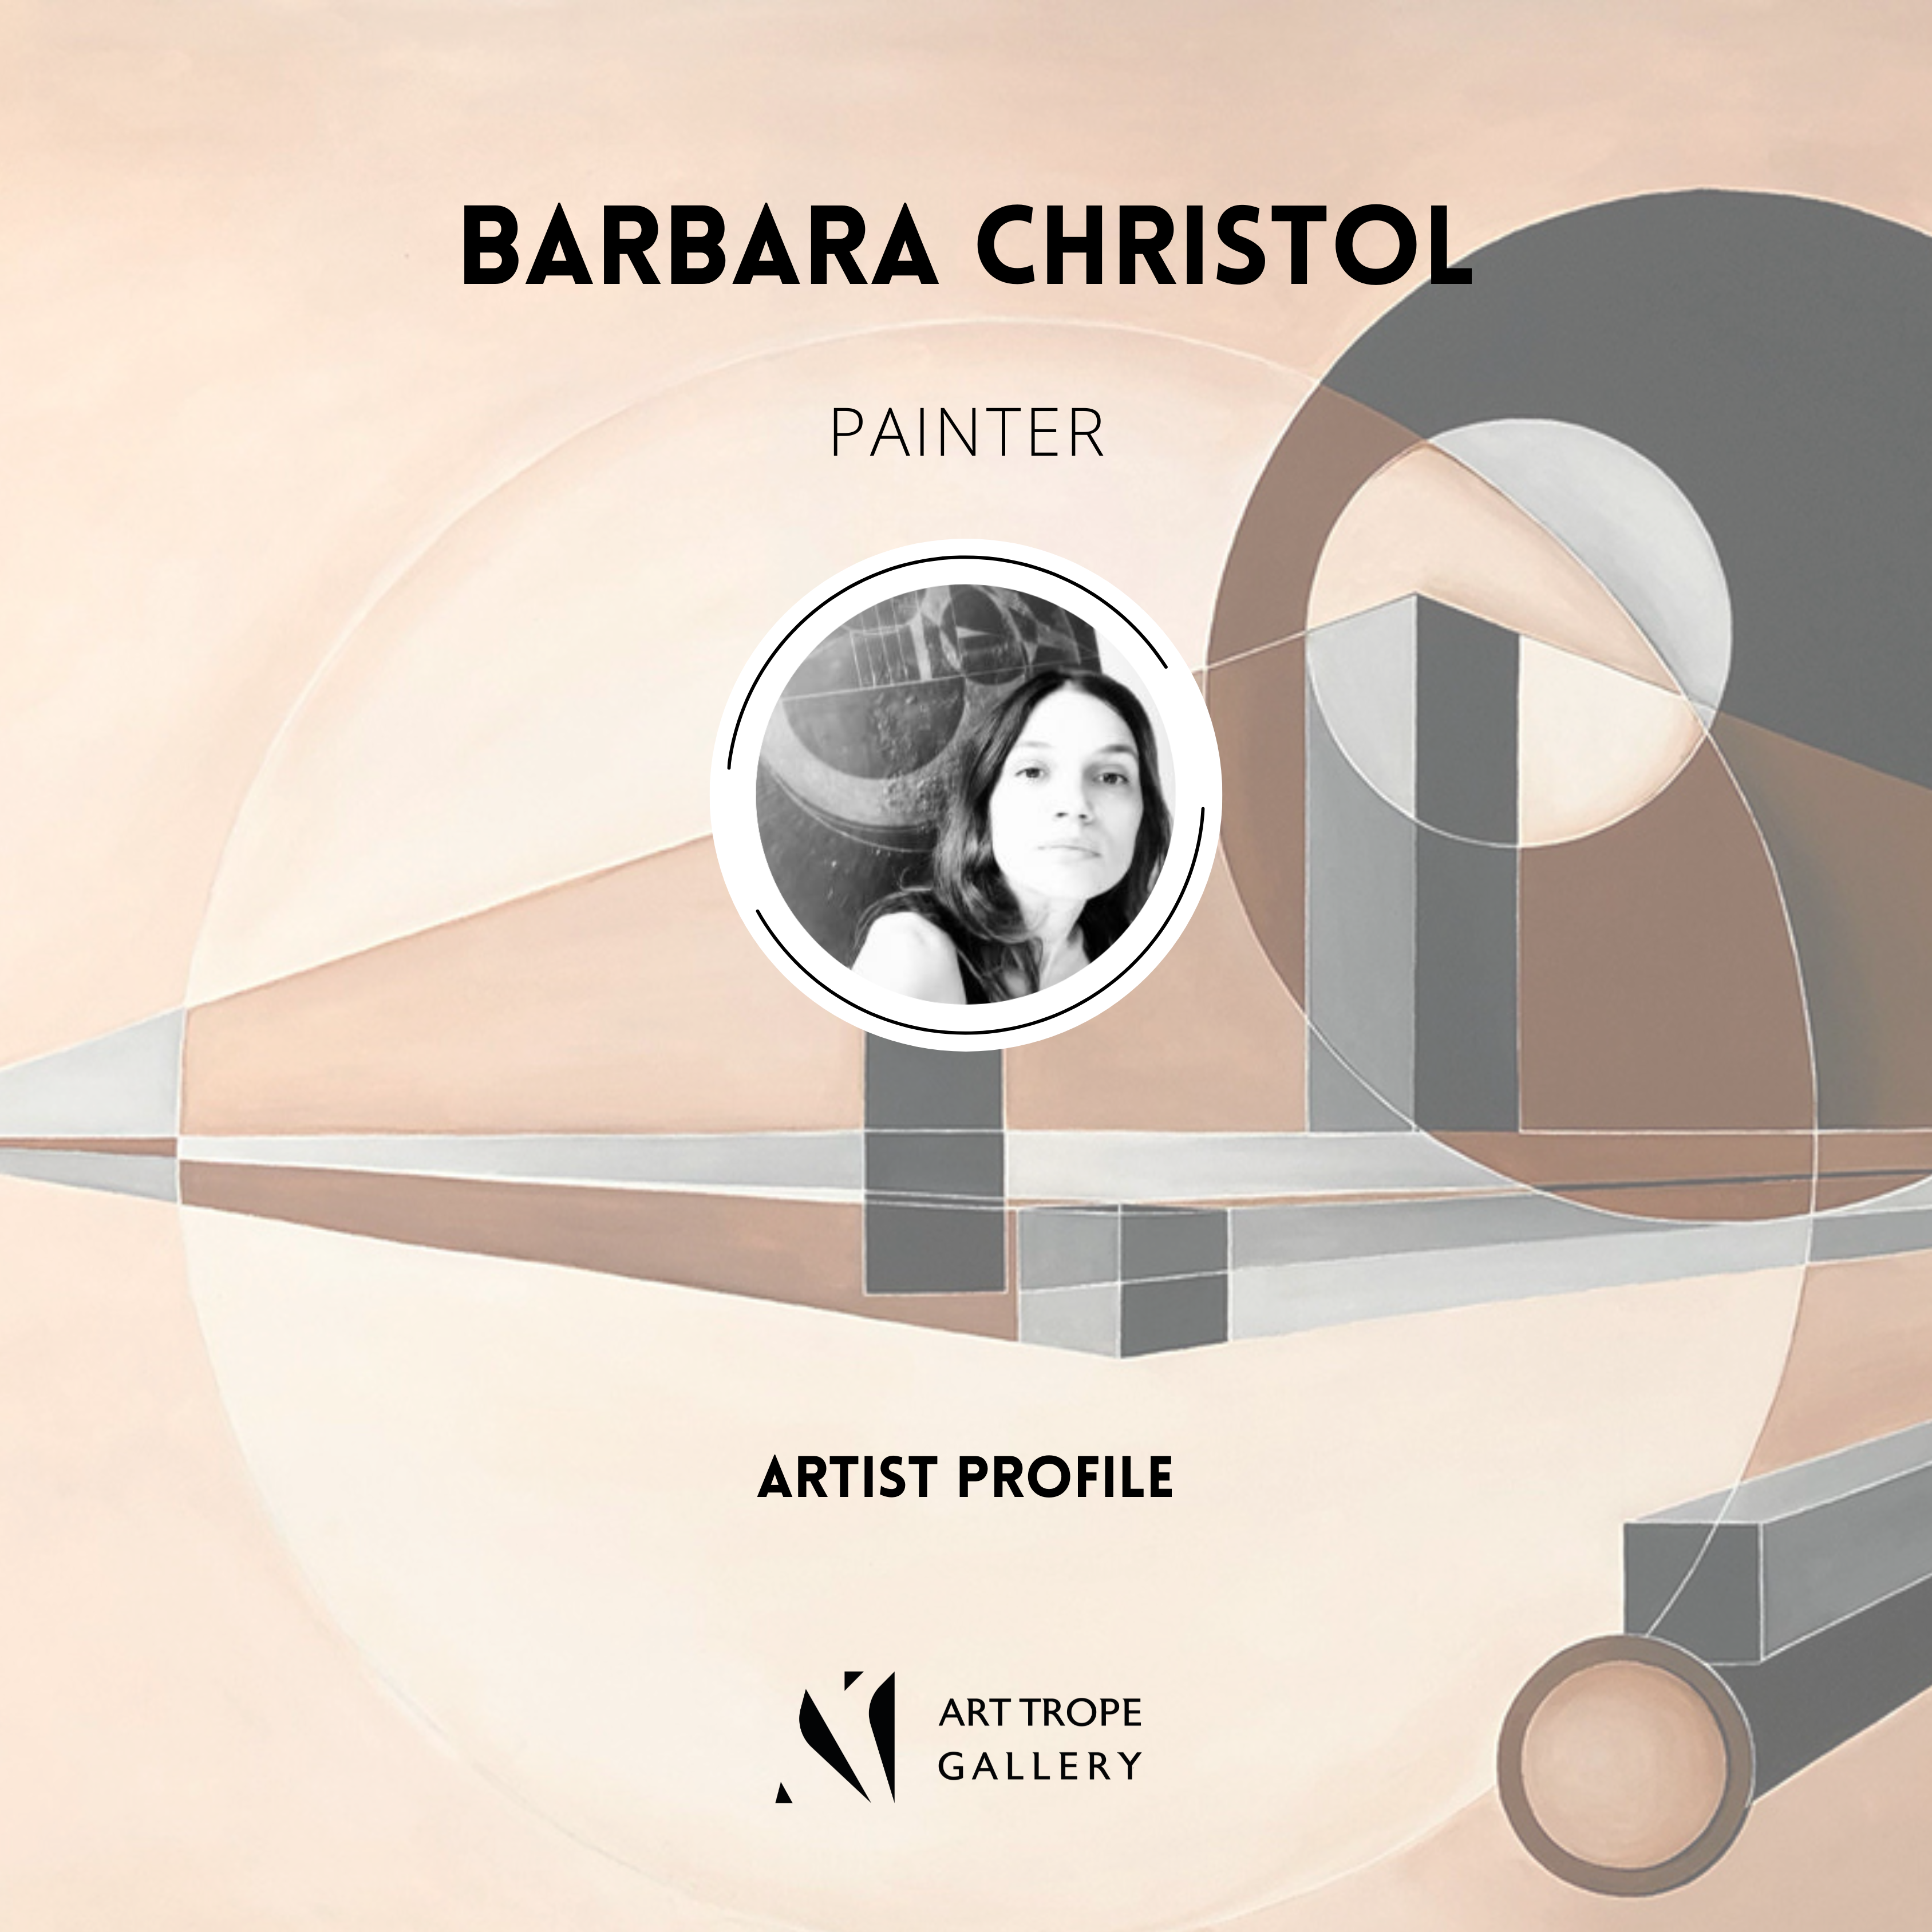 Art Trope Gallery features Painter Barbara Christol in a dedicated article!